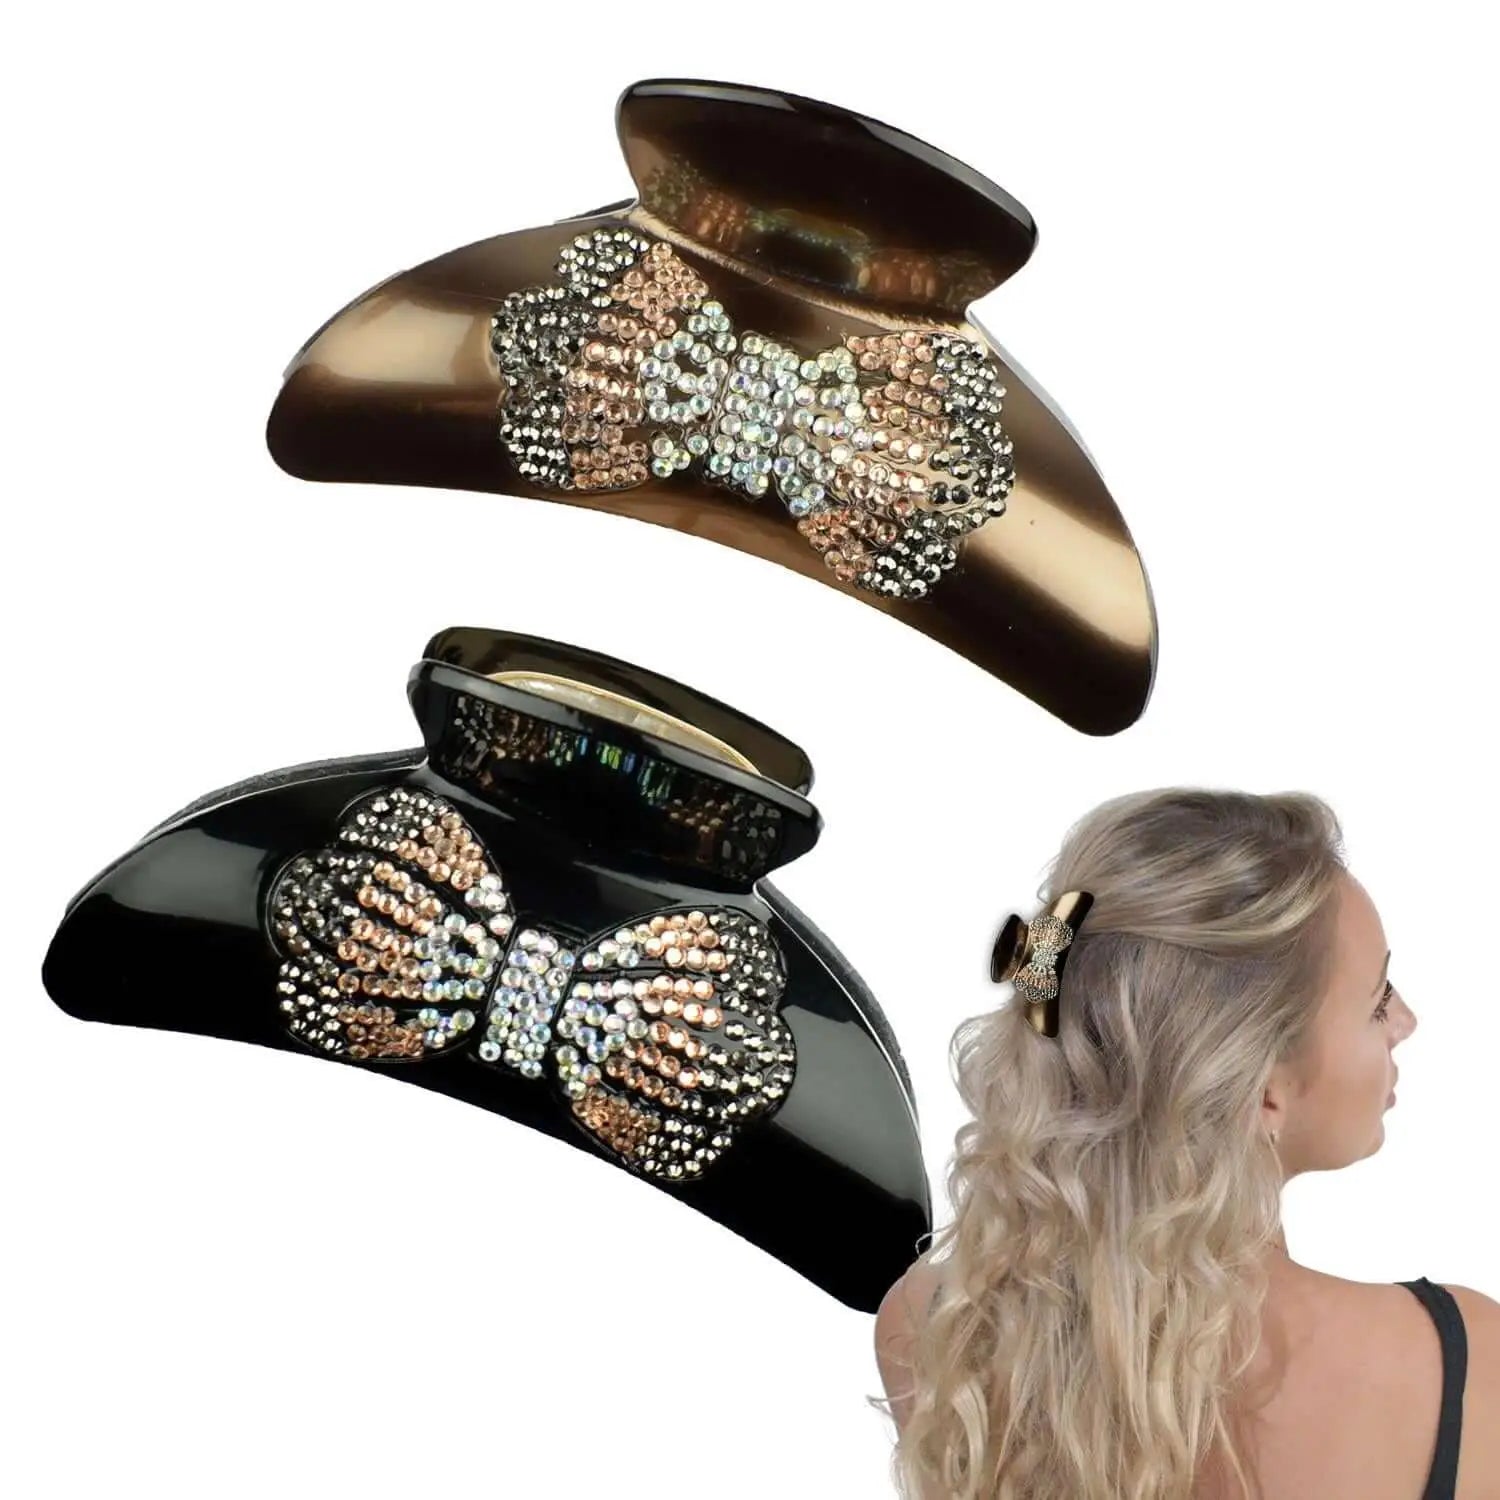 Woman wearing black hat with silver and gold decorations - Glamorous Rhinestone Butterfly Hair Clamps